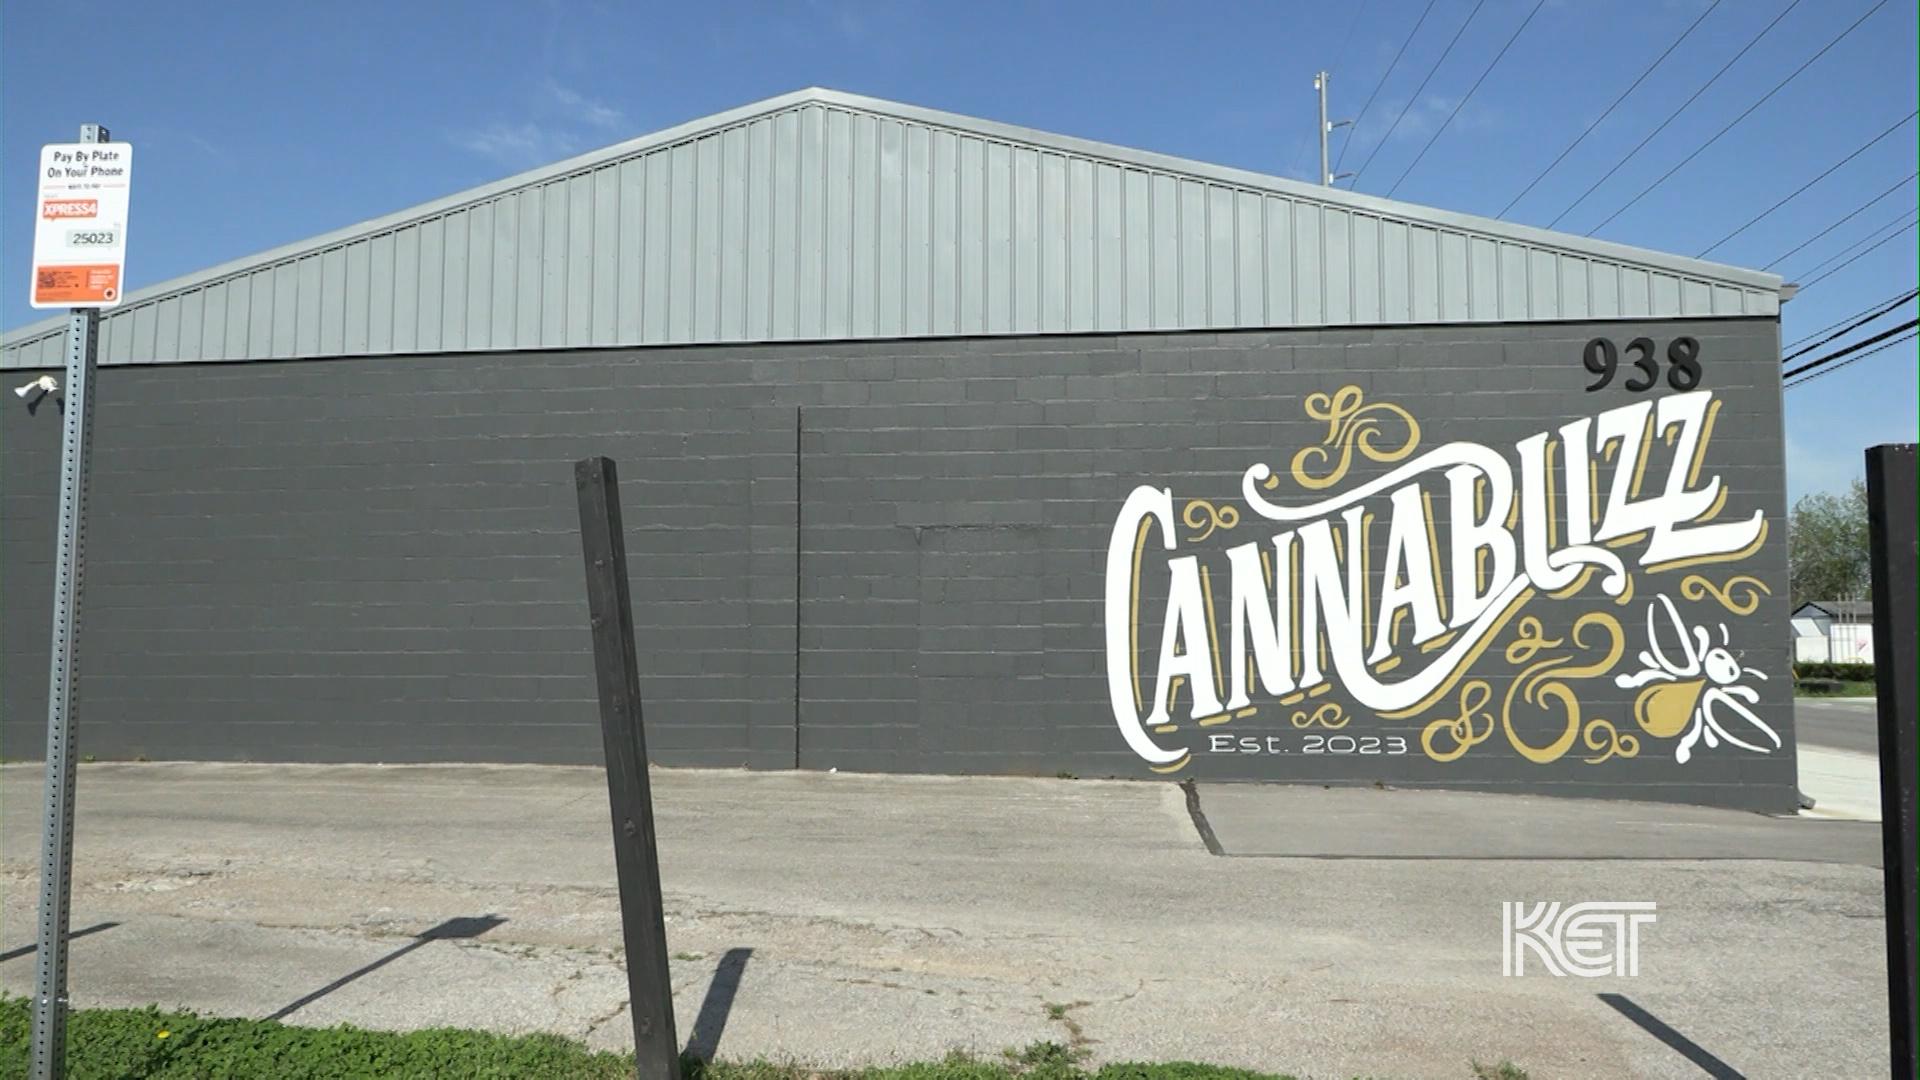 How Hemp-Based Business Cannabuzz is Doing One Year after Opening in Lexington